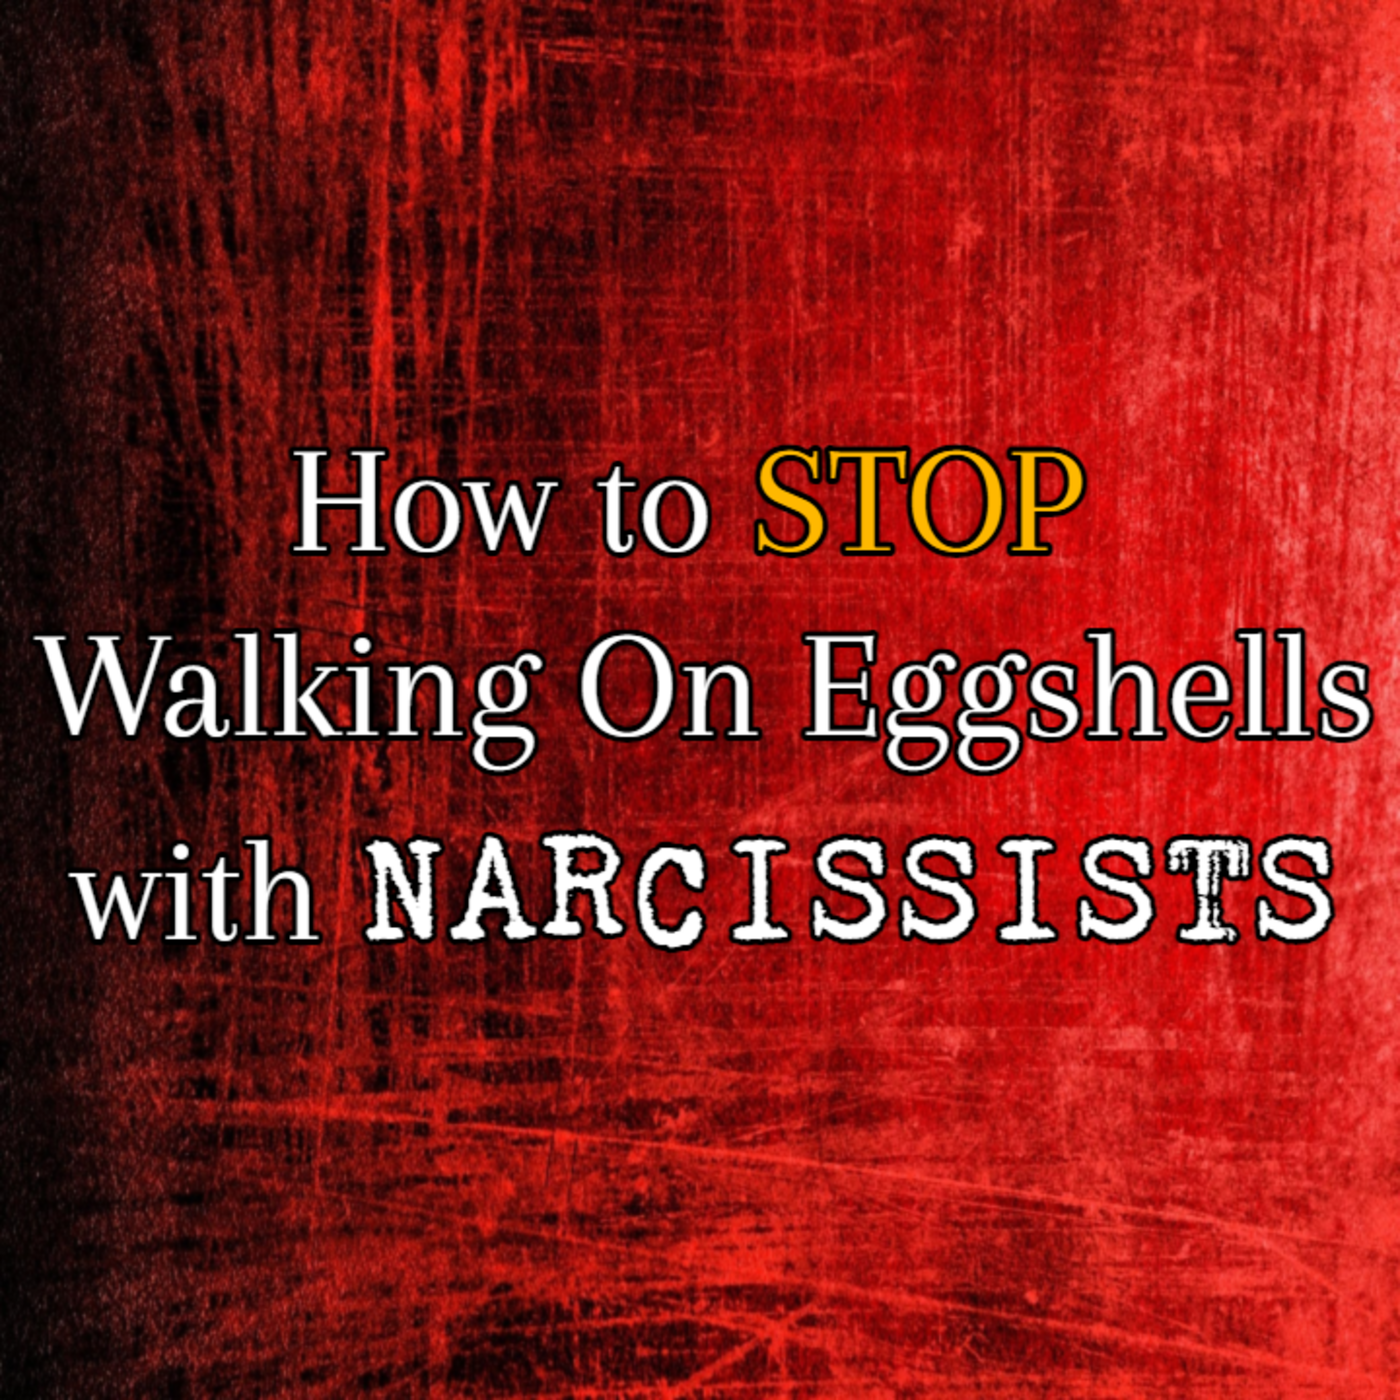 Episode 234: How To Stop Walking On Eggshells With Narcissists